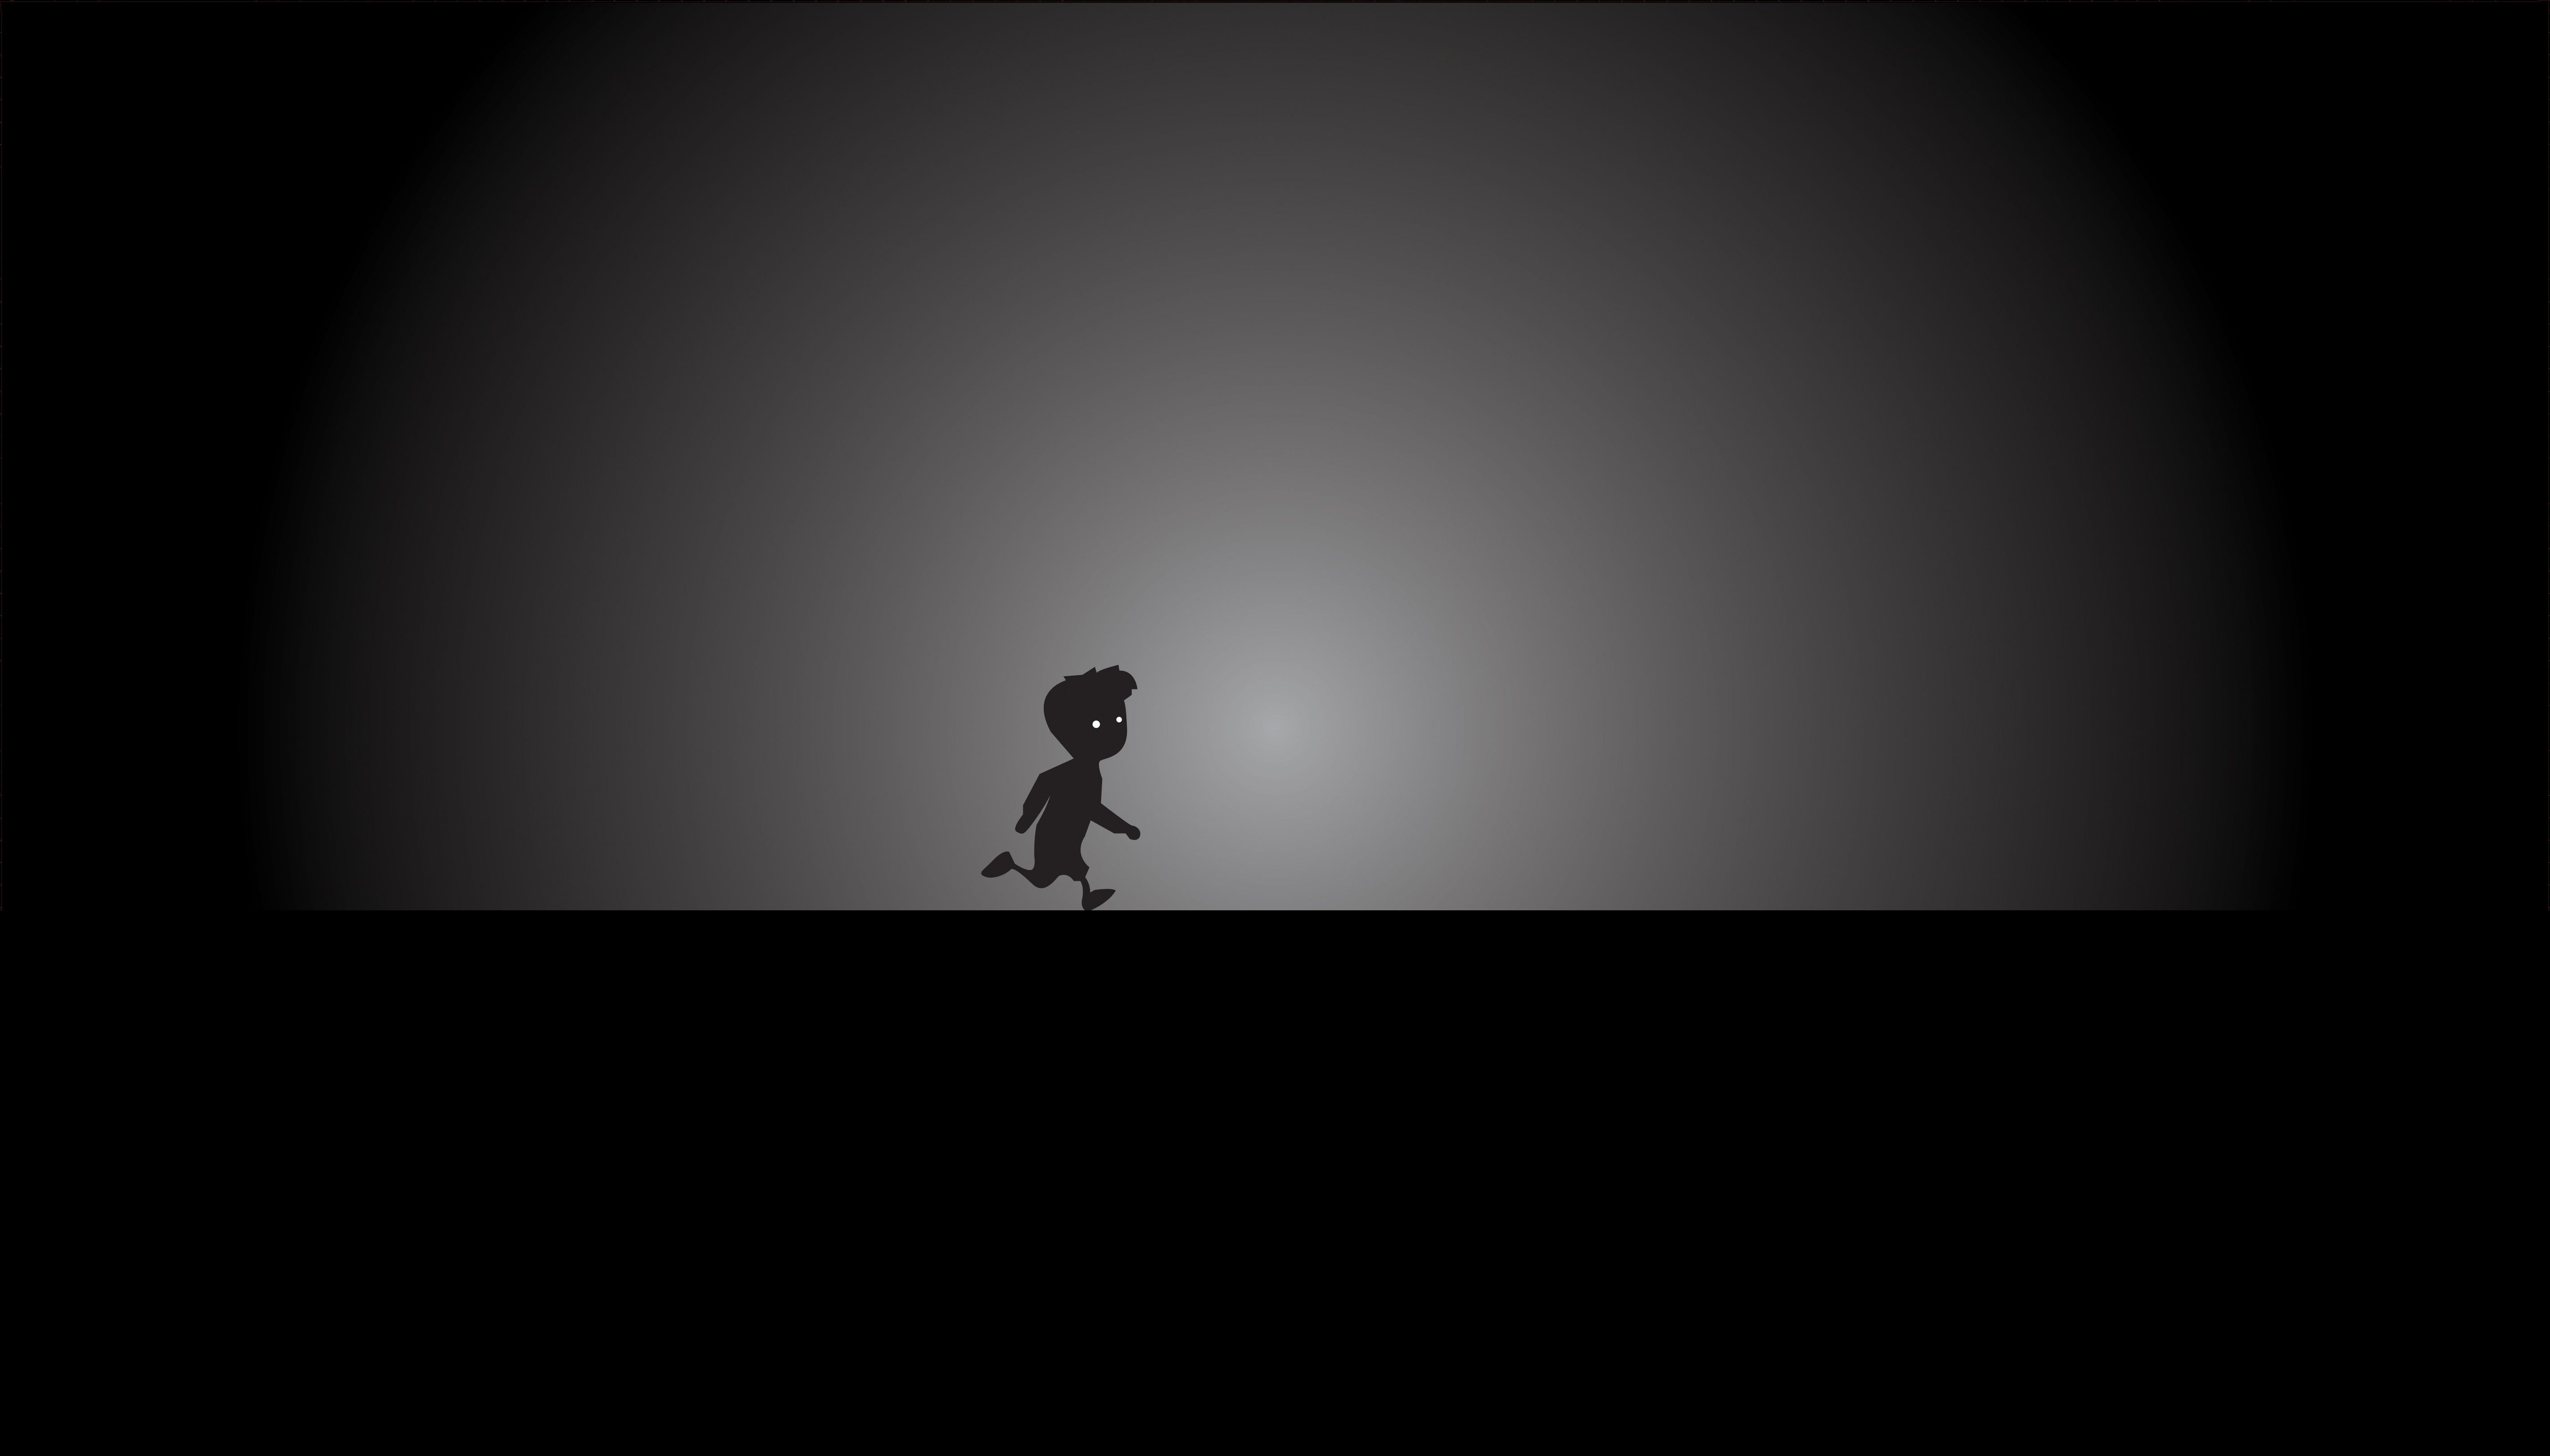 Limbo game Wallpapers by arand4 on DeviantArt